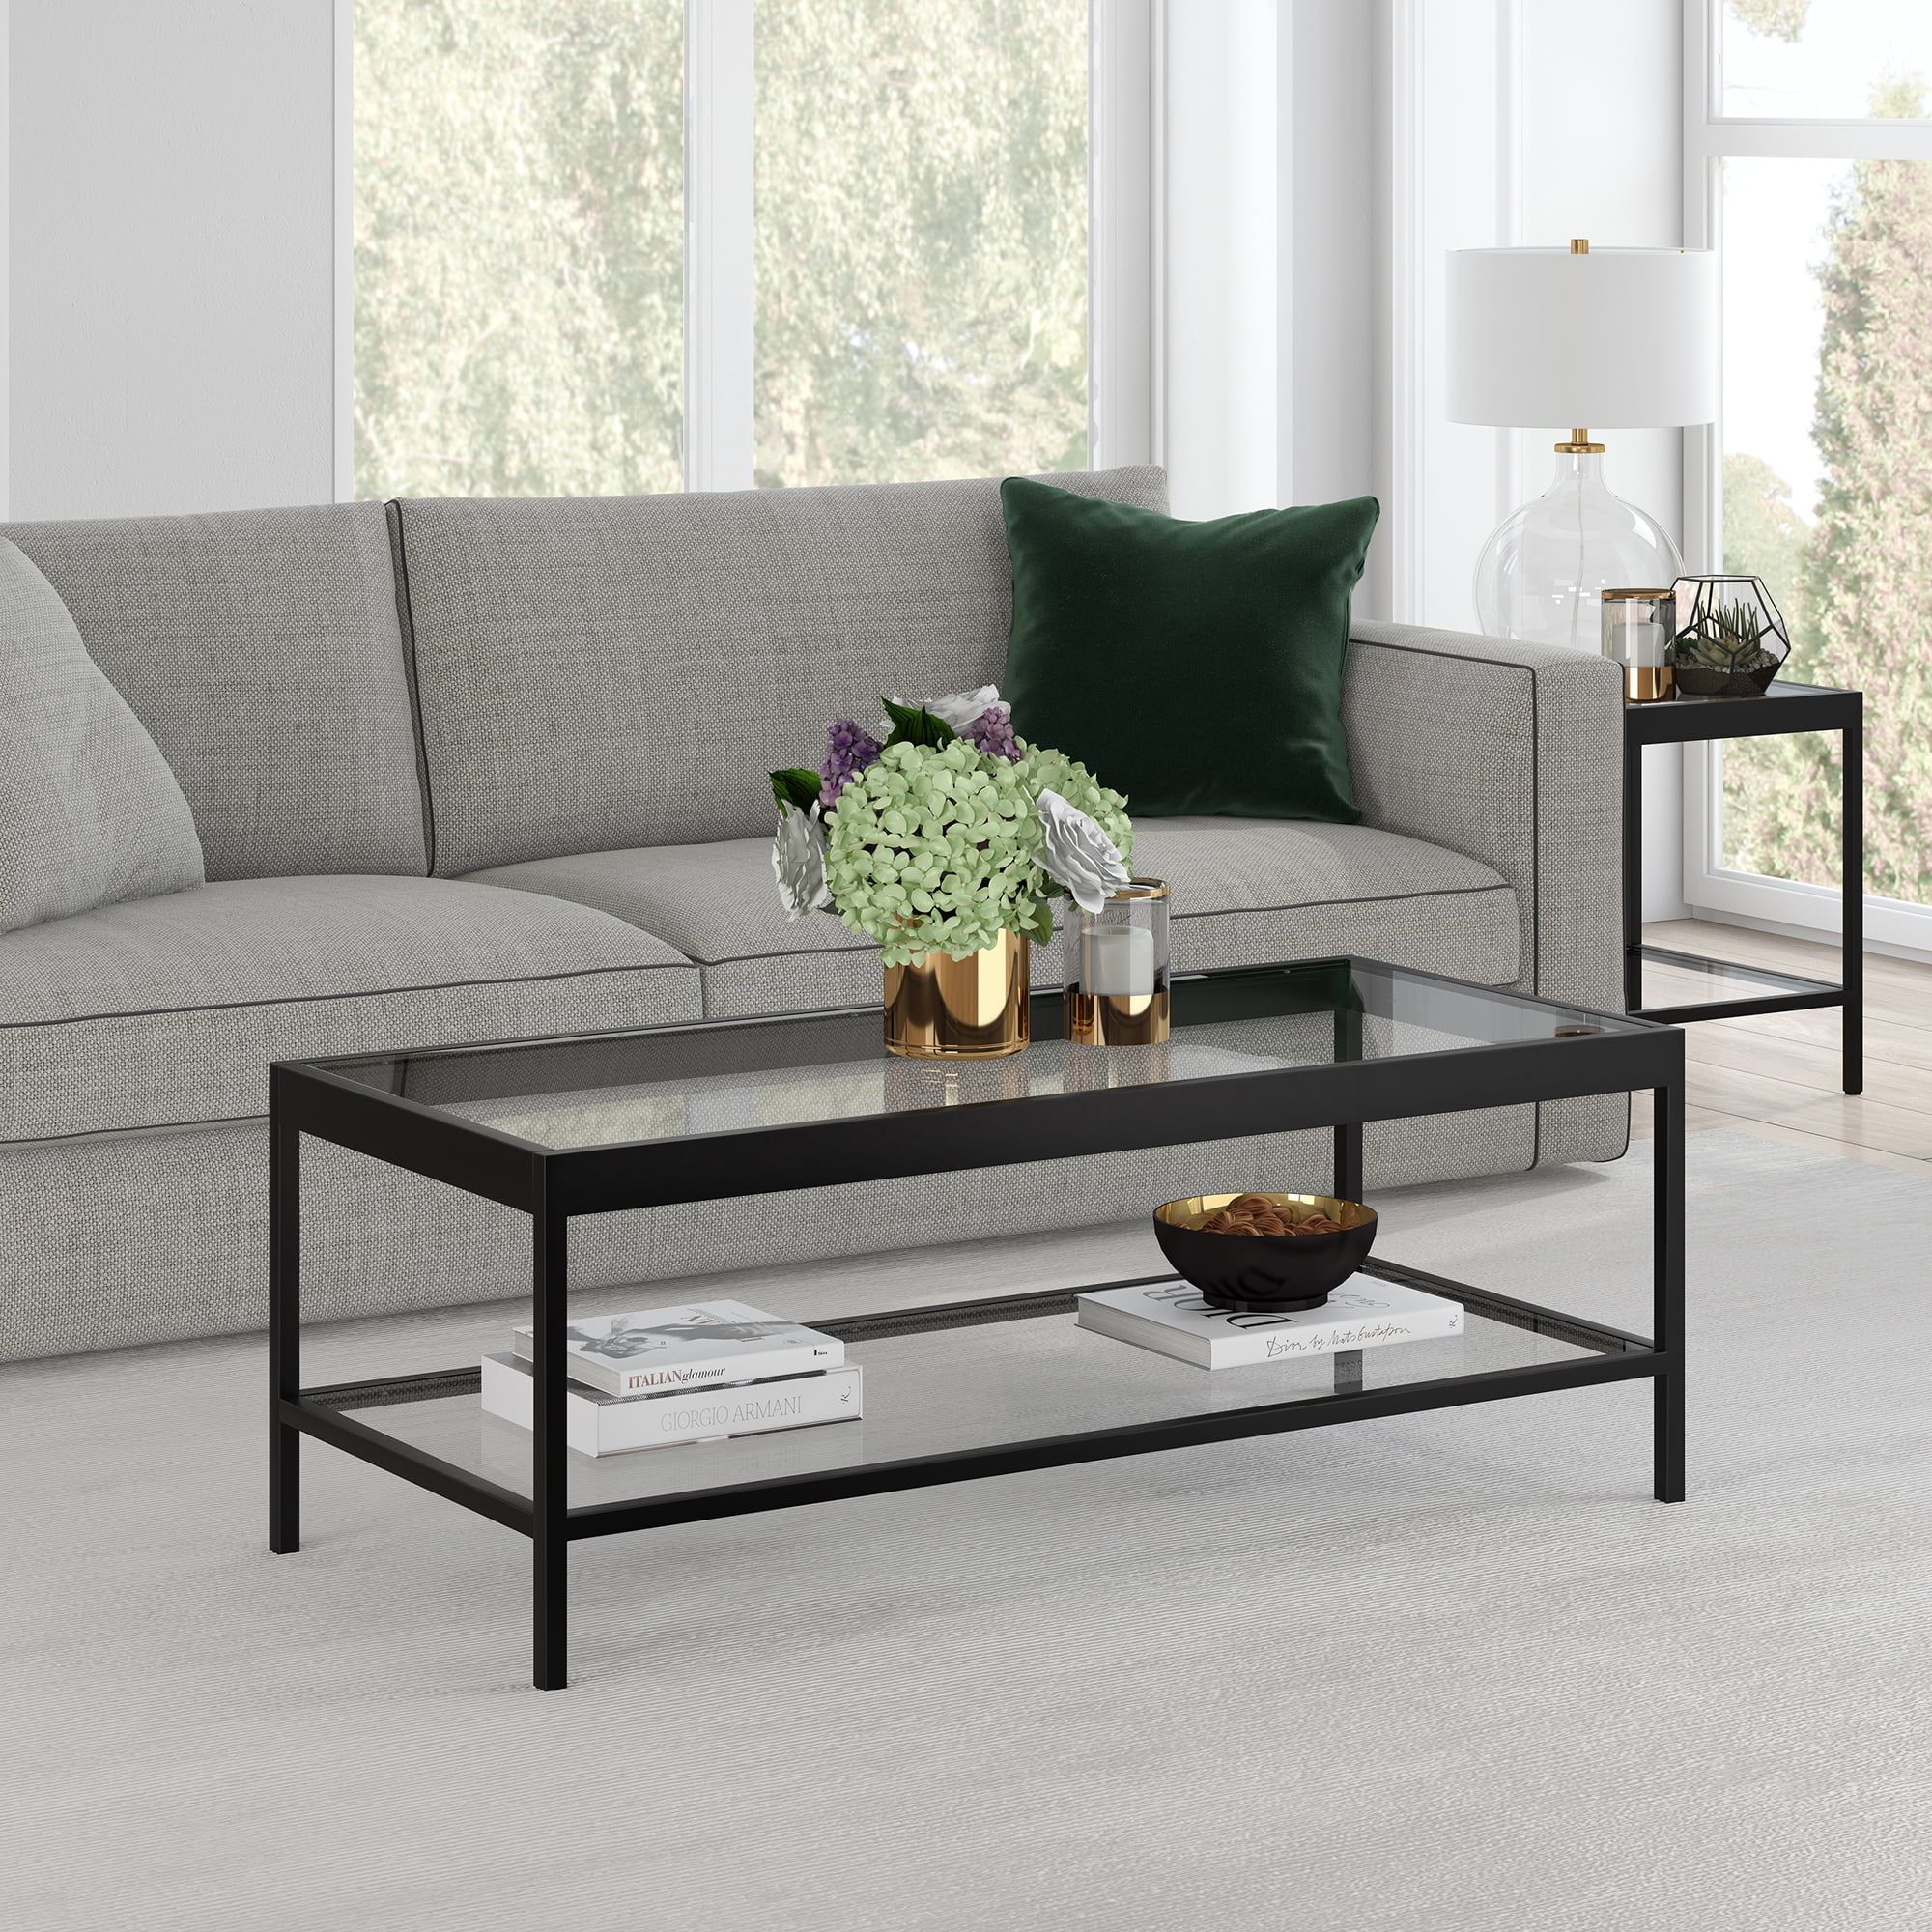 Modern Coffee Table With Open Shelf, Rectangular Table For Living Room Inside Coffee Tables With Open Storage Shelves (Gallery 5 of 20)